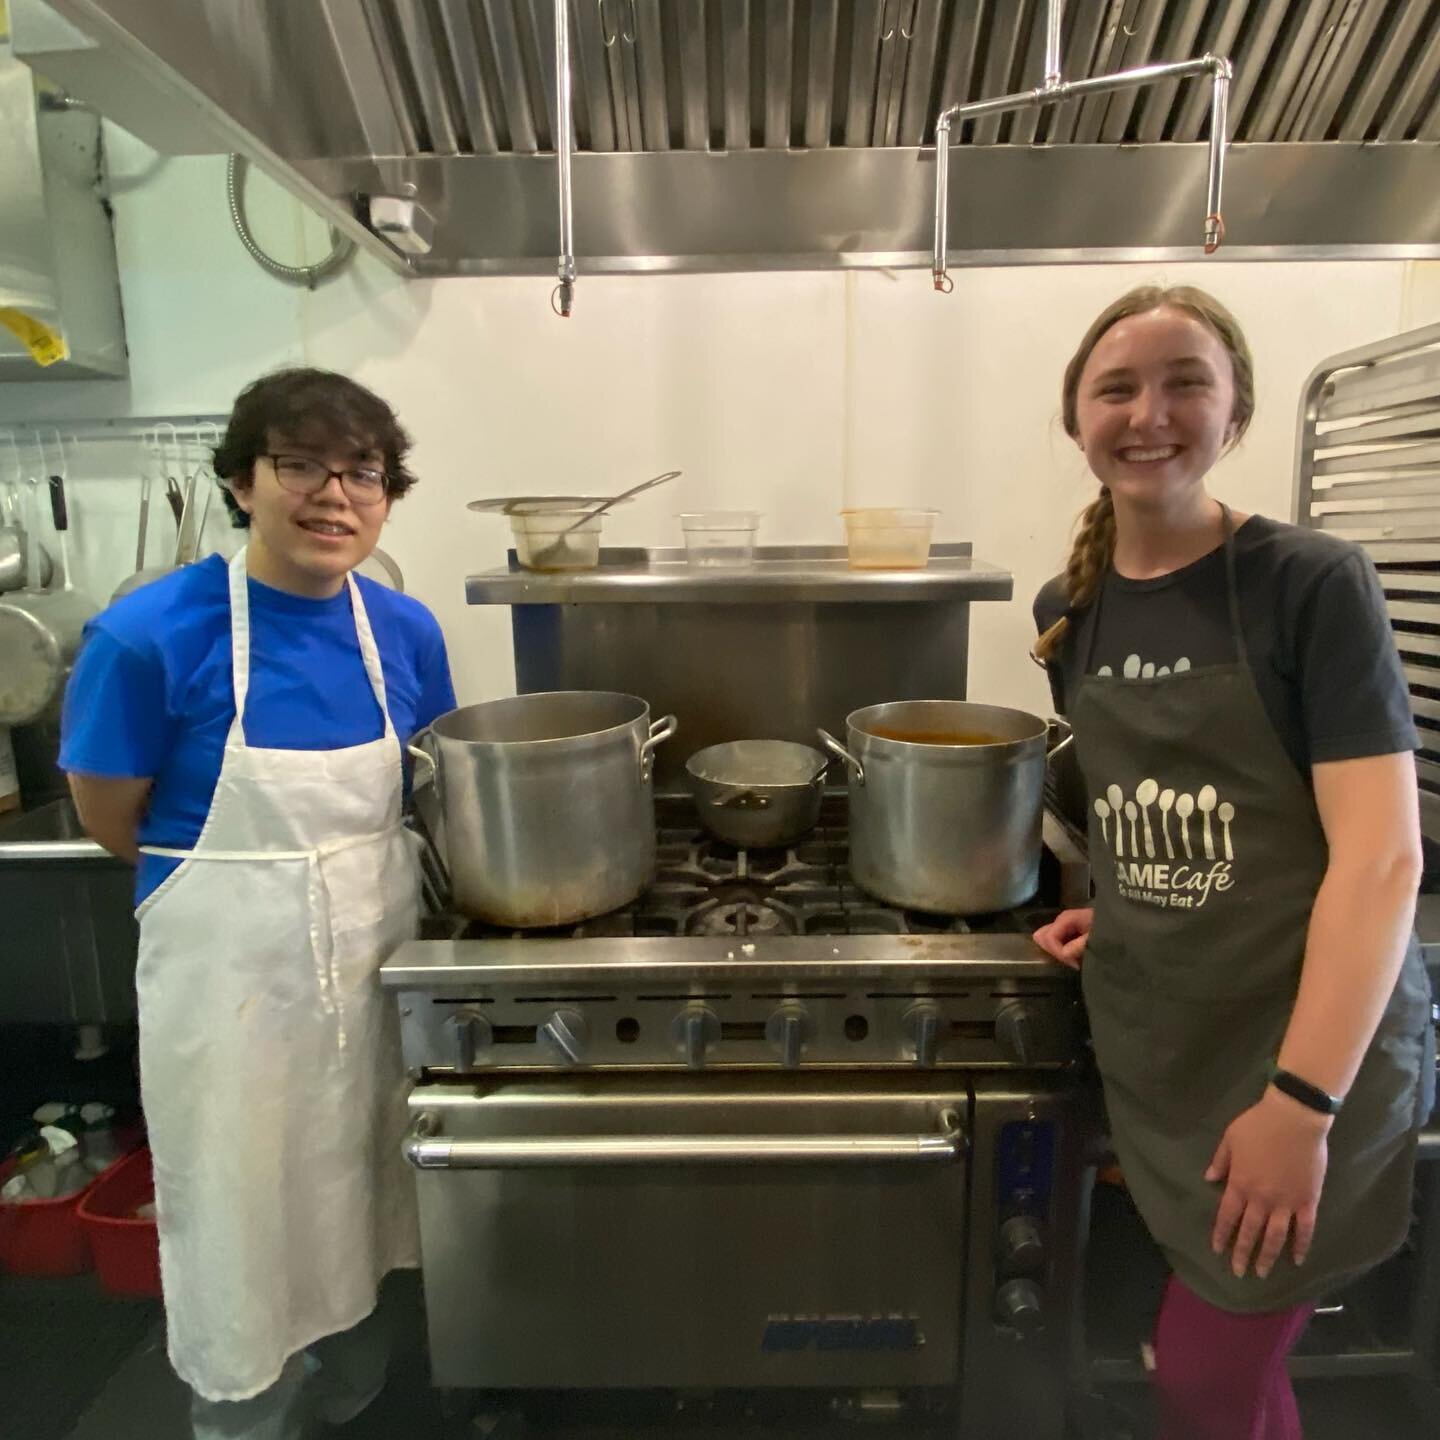 We&rsquo;ve got TWO cooks in the kitchen today! Maria and Jesus (our rockstar @arrupejesuit intern) worked together to create today&rsquo;s menu. Maria made a Pork Chorizo &amp; Potato Soup, and Jesus prepared a Sweet Potato Chili. 

We love this col